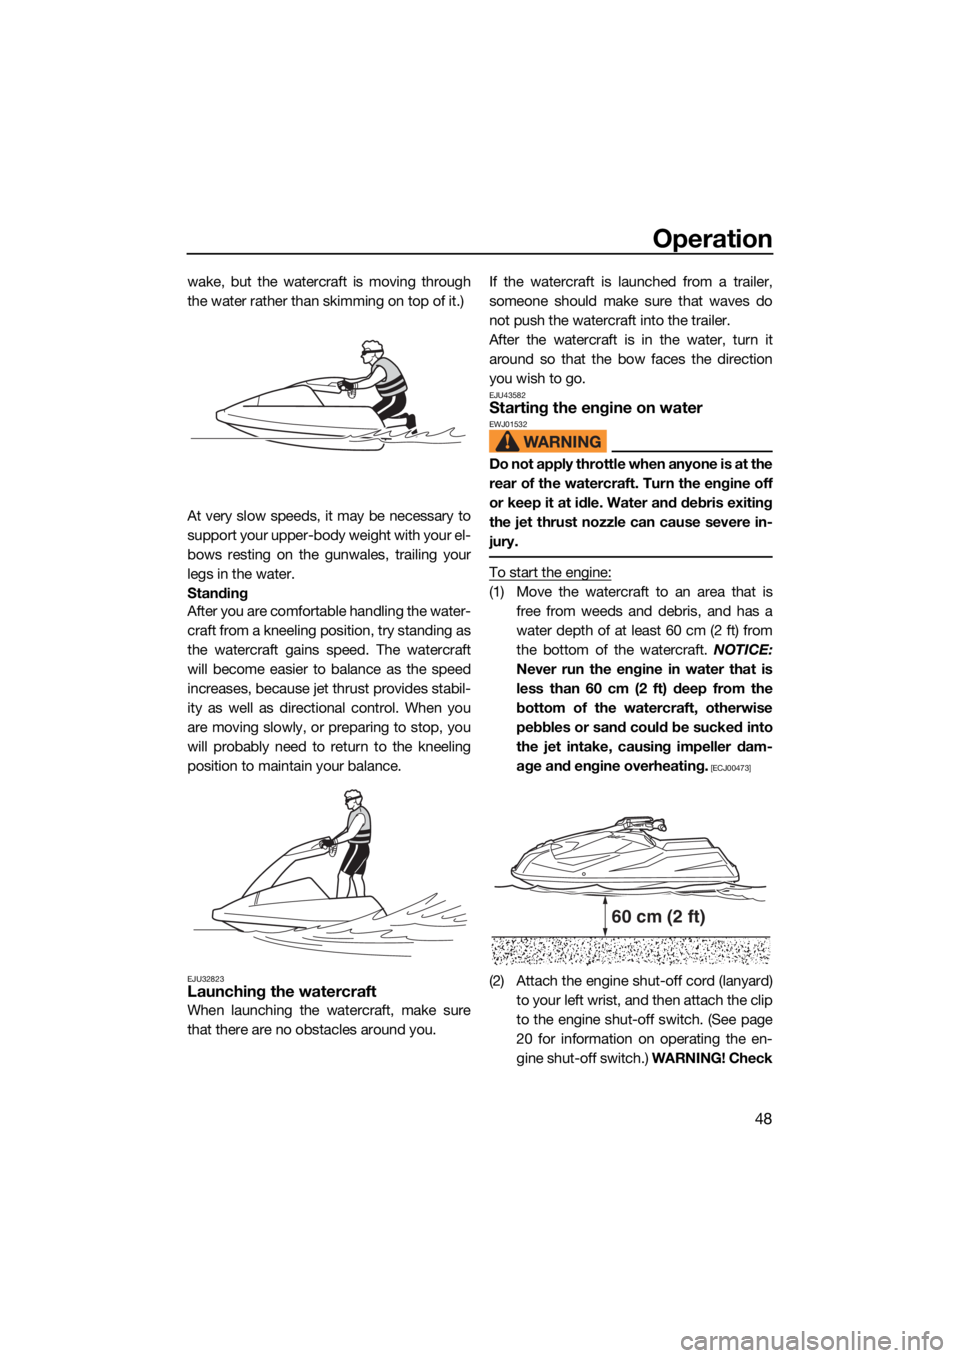 YAMAHA SUPERJET 2022  Owners Manual Operation
48
wake, but the watercraft is moving through
the water rather than skimming on top of it.)
At very slow speeds, it may be necessary to
support your upper-body weight with your el-
bows rest